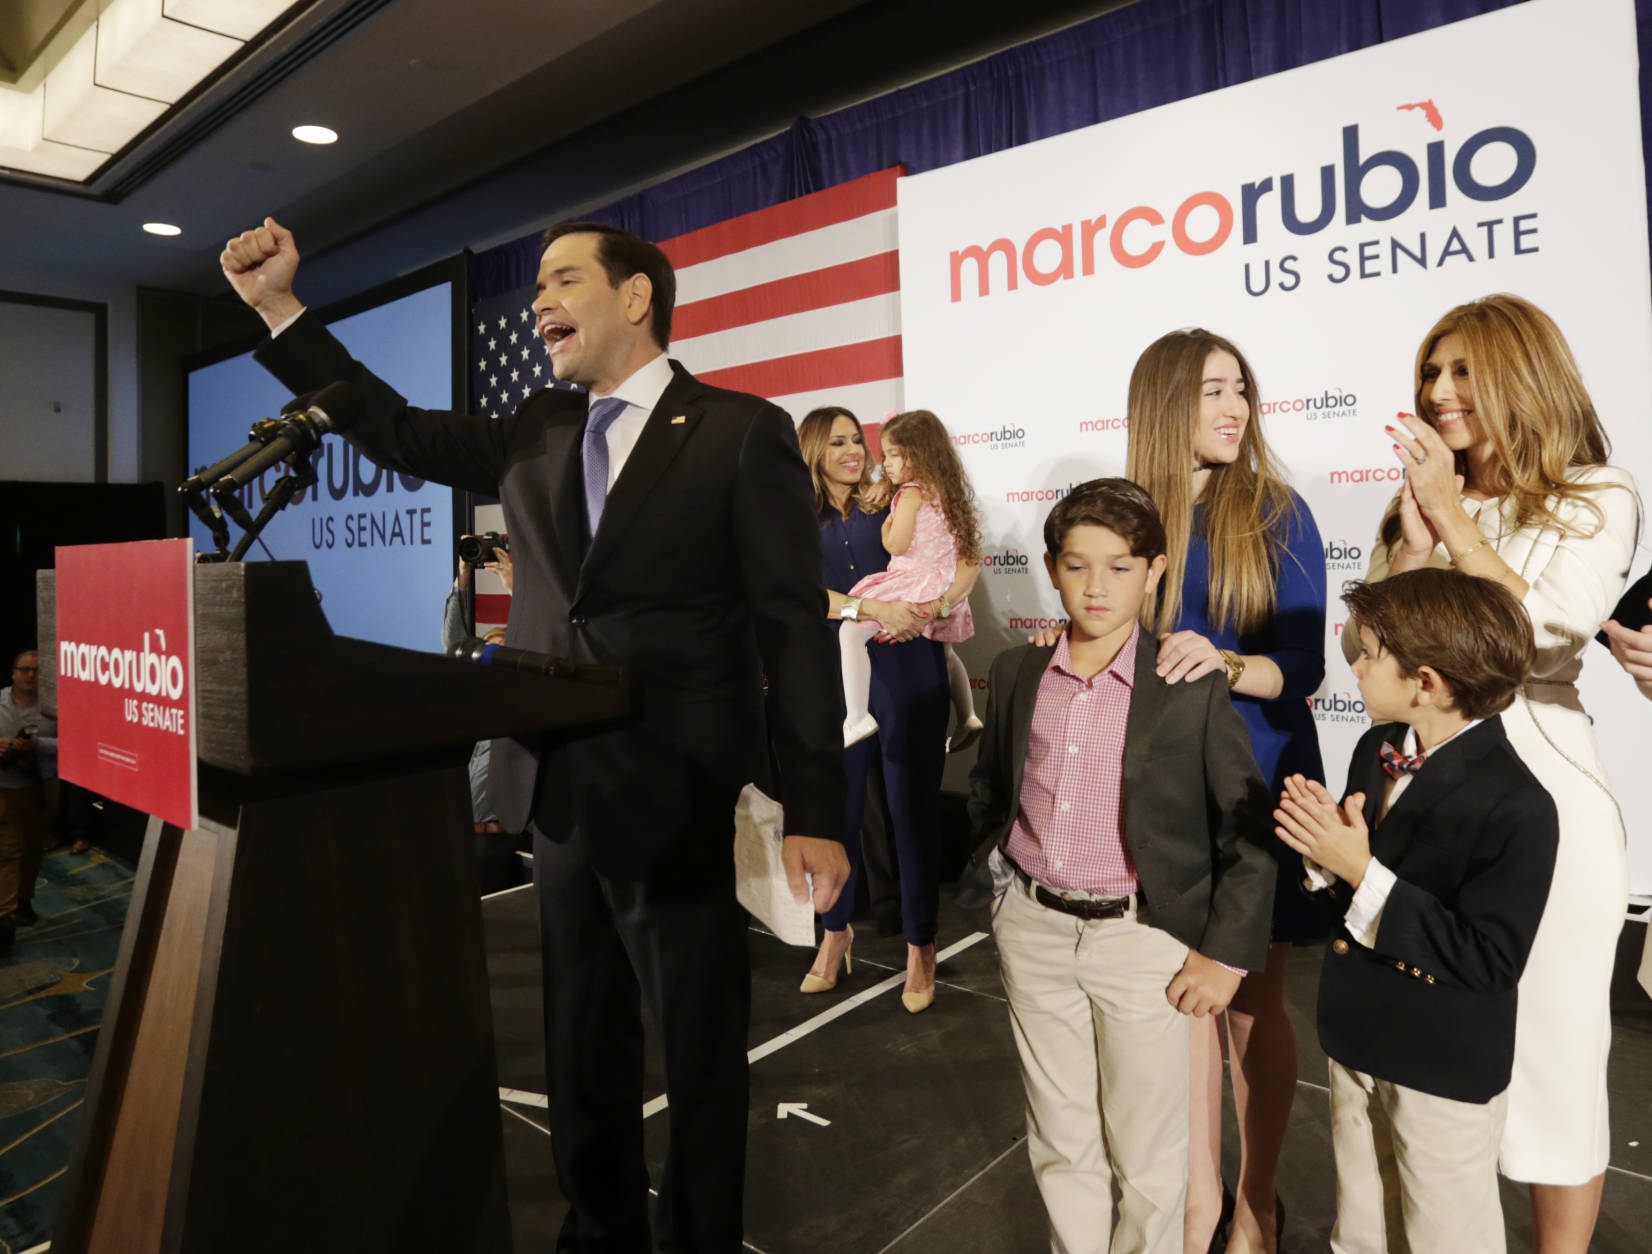 Florida Republican Sen. Marco Rubio acknowledges the cheers from supporters after winning a second term in office. Rubio defeated U.S. Rep. Patrick Murphy, a two-term congressman. His wife and children are behind him. (AP Photo/Wilfredo Lee)